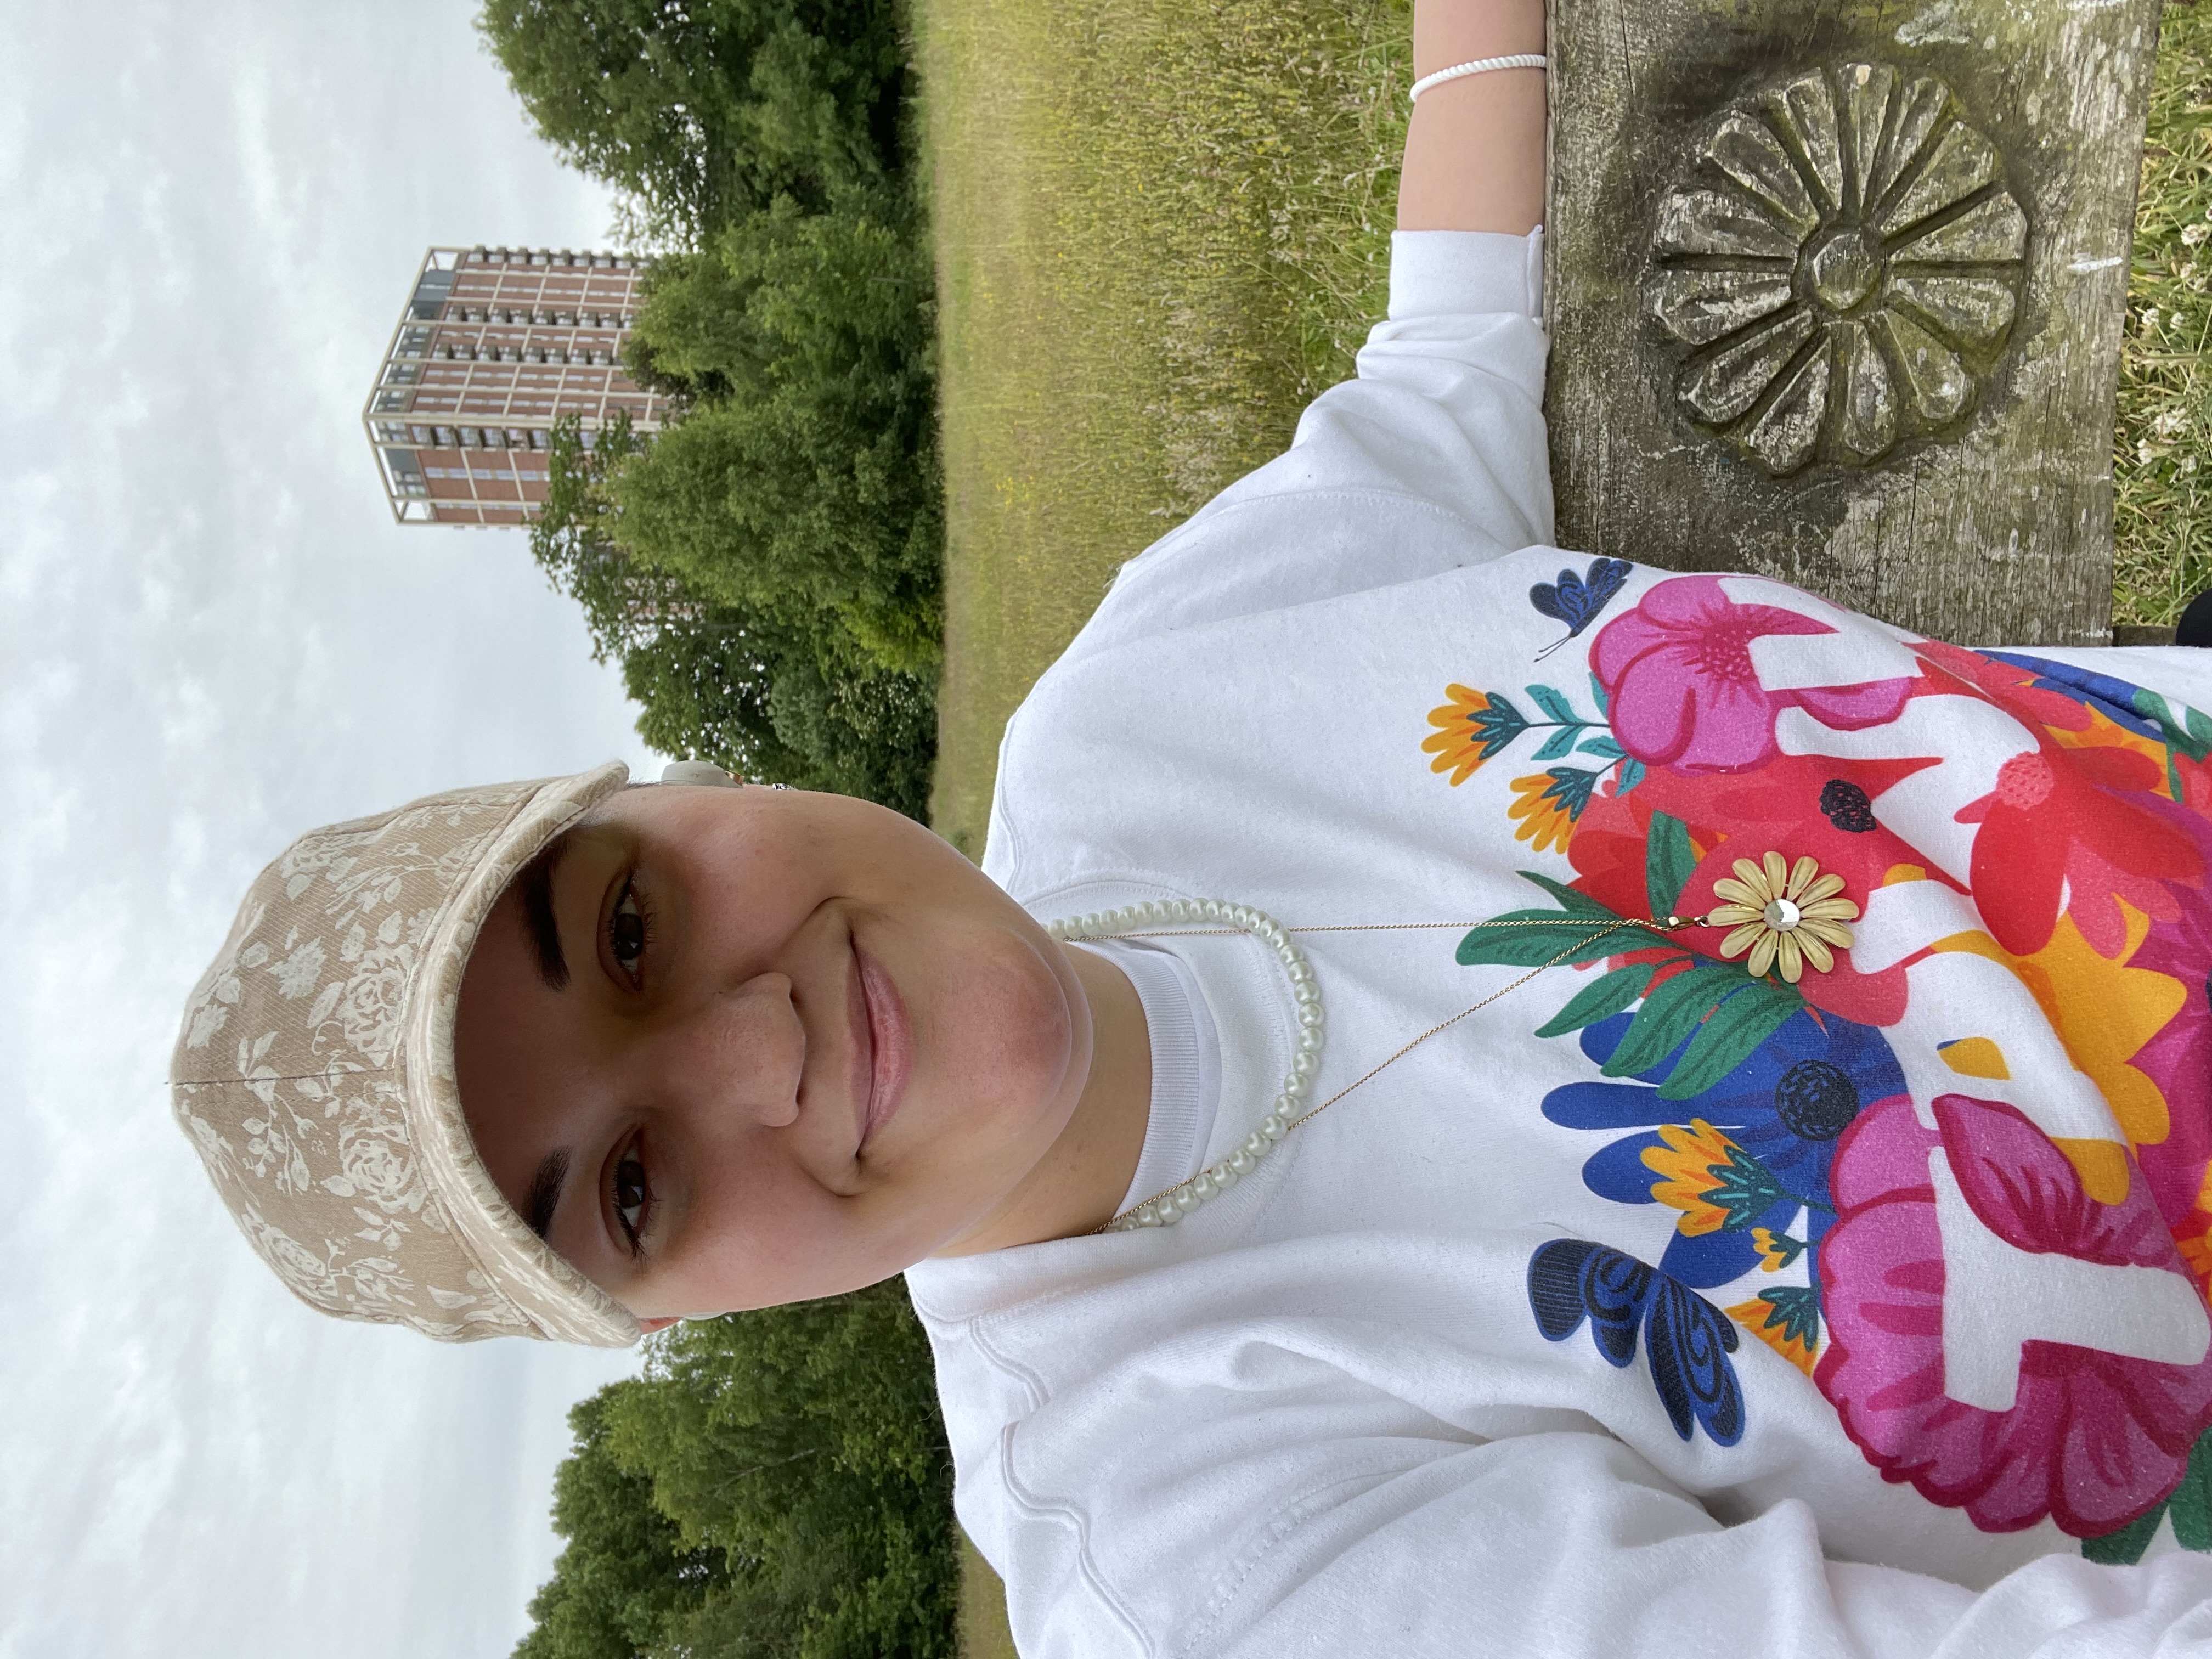 Photo of Andy Zubac, a white non-binary person, smiling into the camera while sitting on a bench in the middle of a grassy field. They are wearing a hat, sweater, and jewellery all following a flower motif and the bench is also carved with a matching flower design.